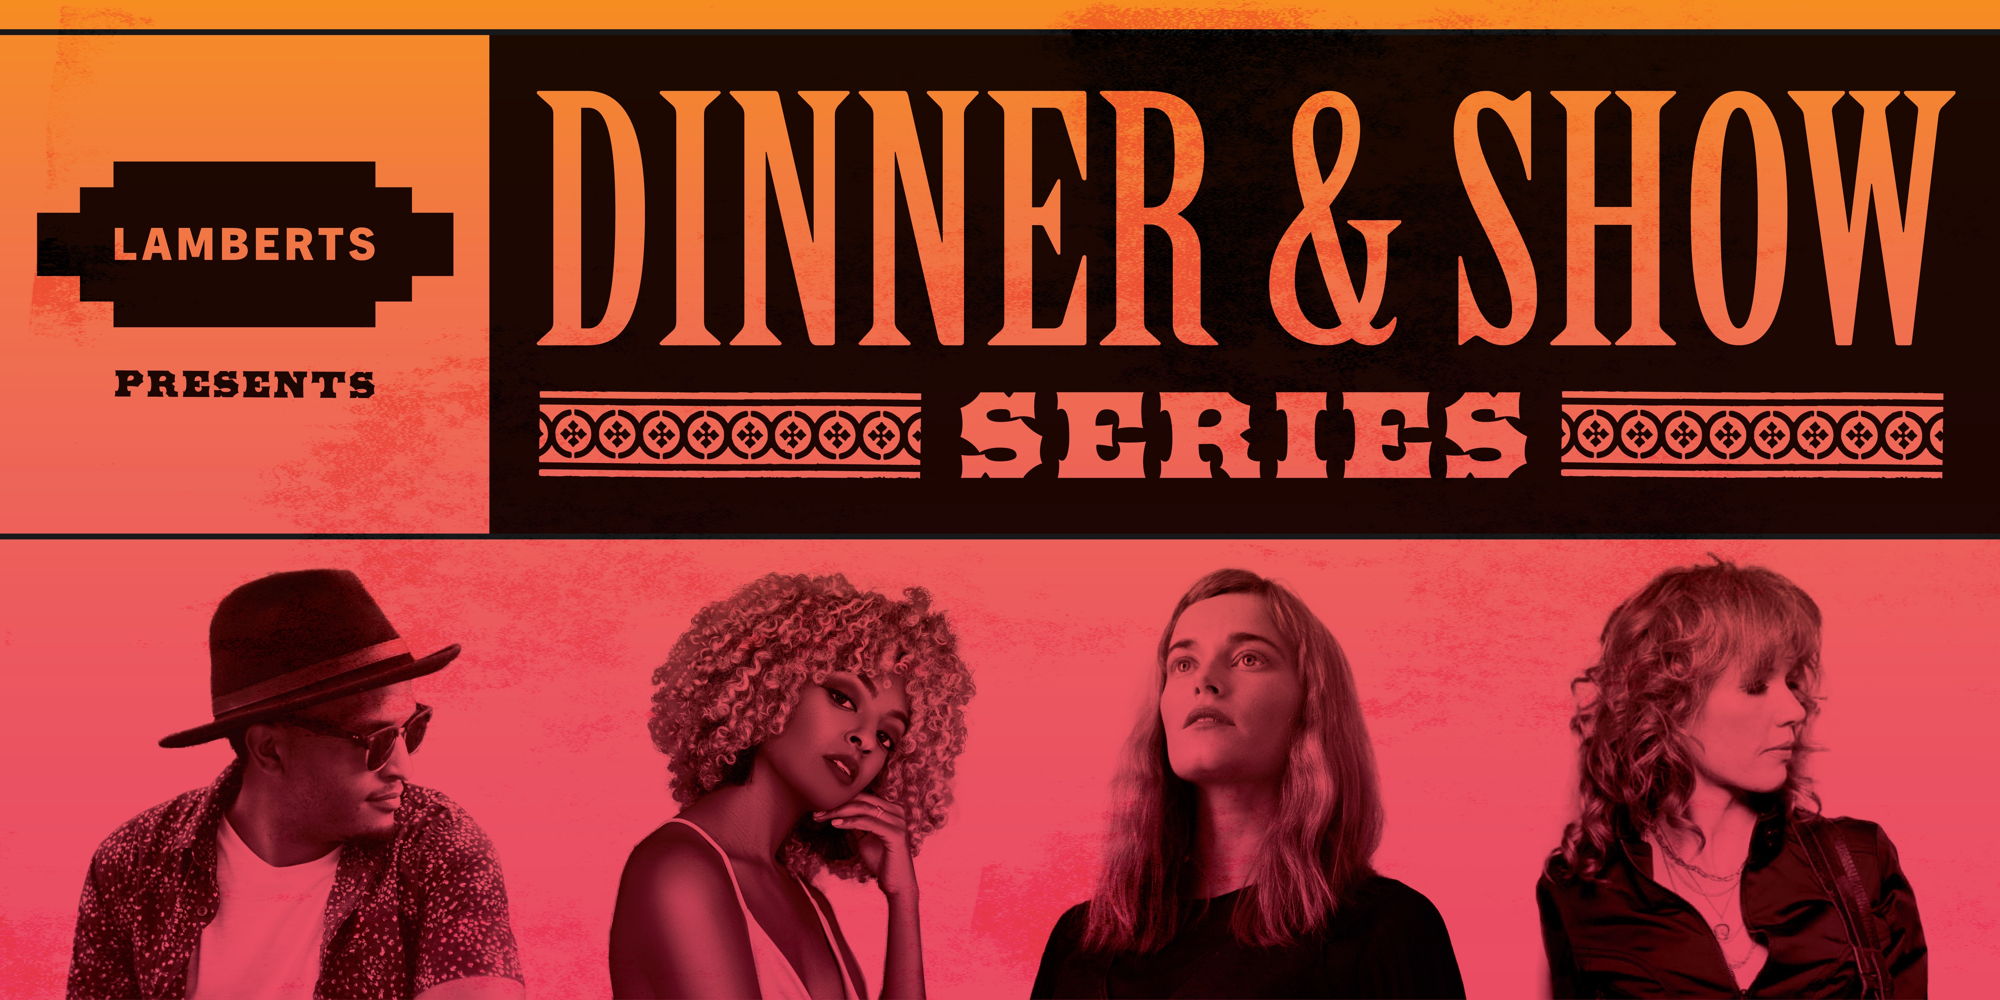 Dinner & Show  promotional image